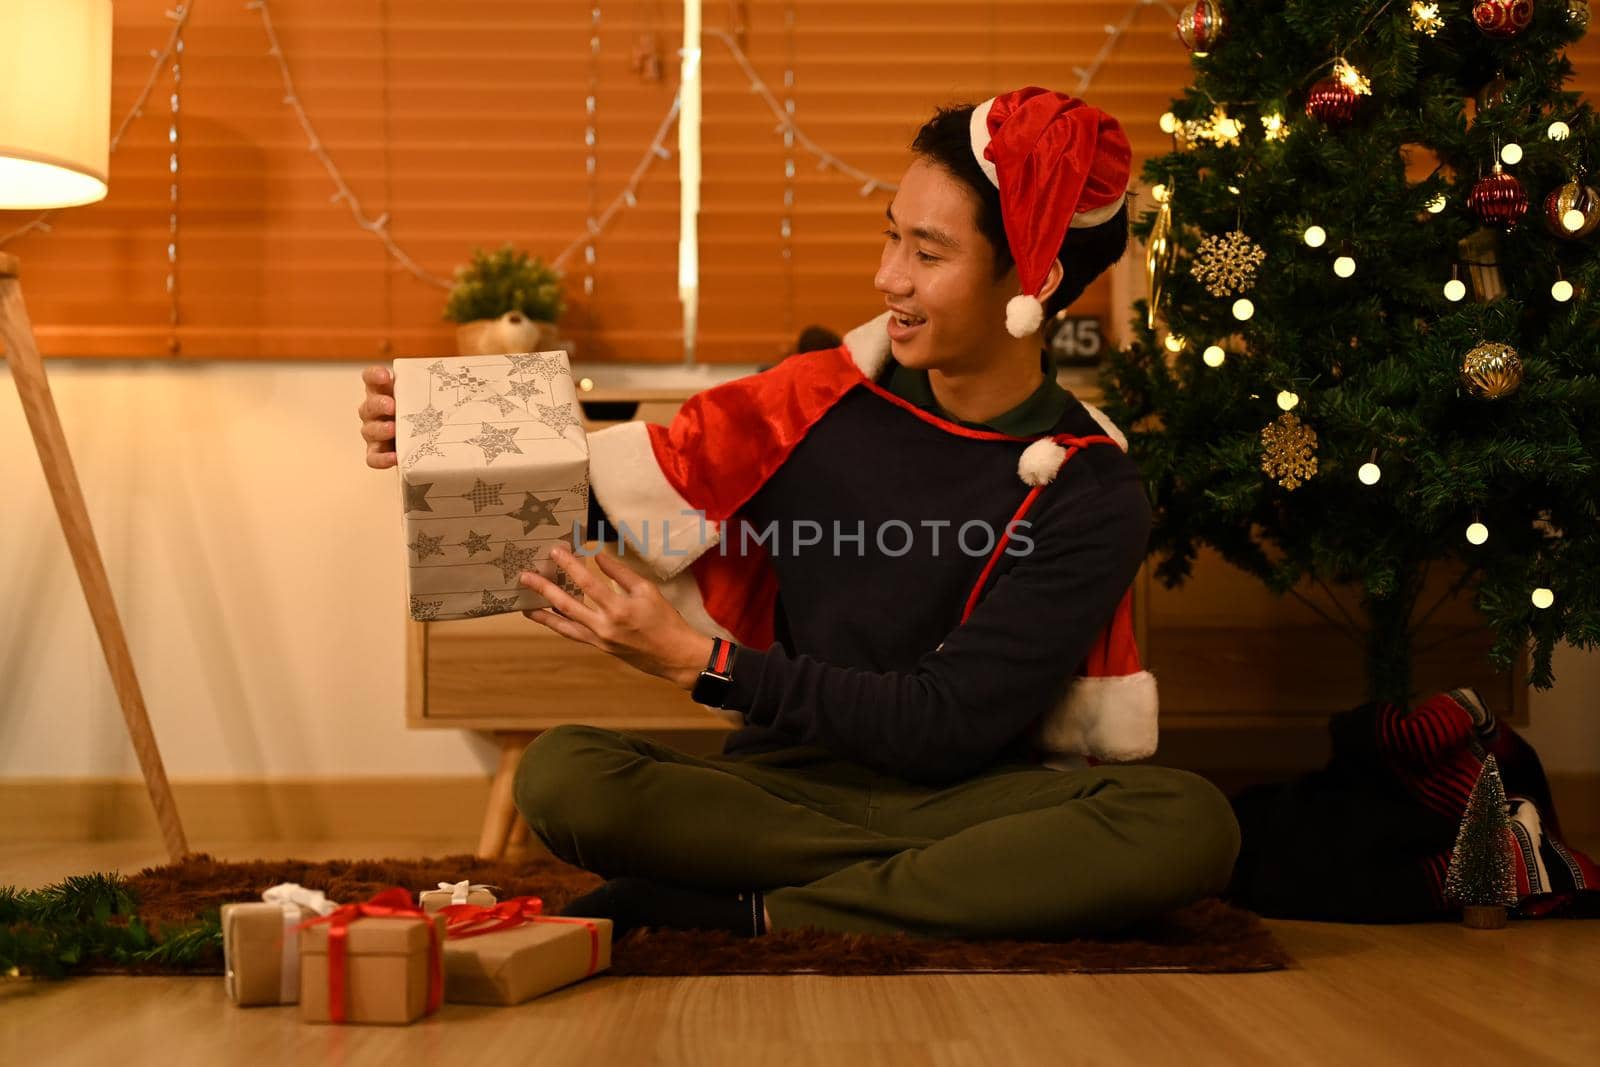 Excited man wearing Santa hat sitting near decorated Christmas tree and opening gifts. Holidays and Christmas concept.